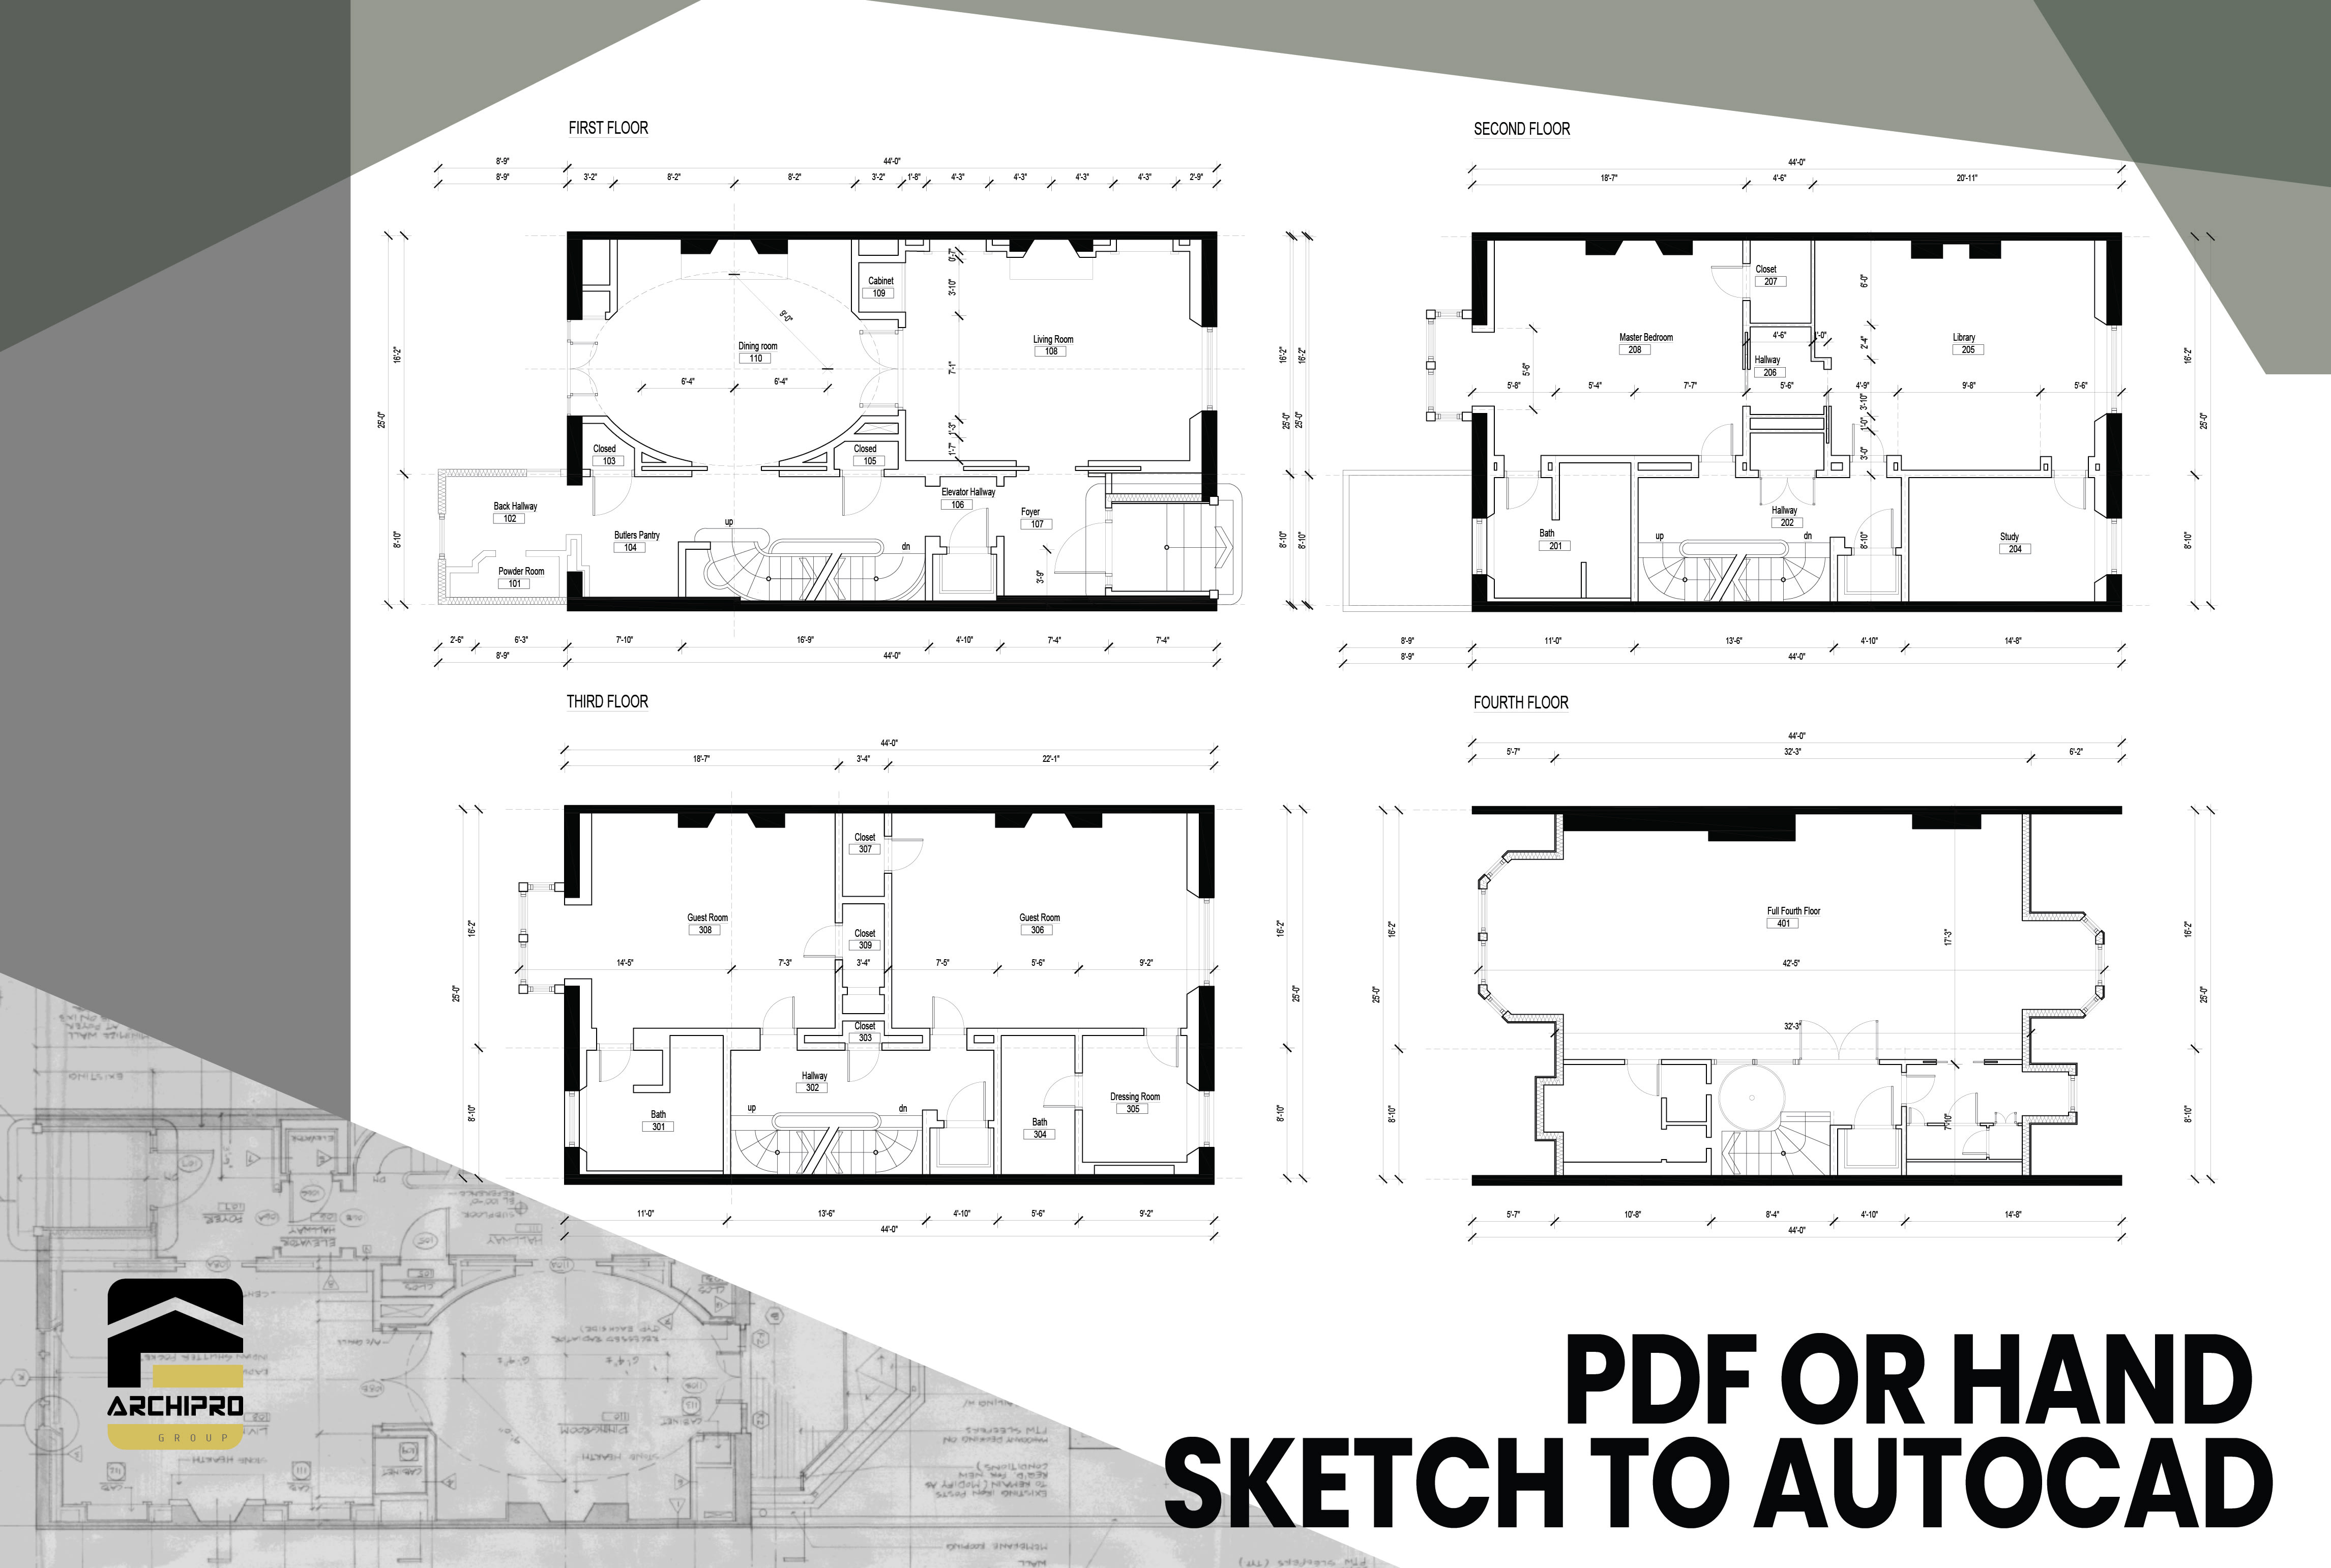 Draw 2d Floor Plans In Autocad From Your Pdf Or Hand Sketch By